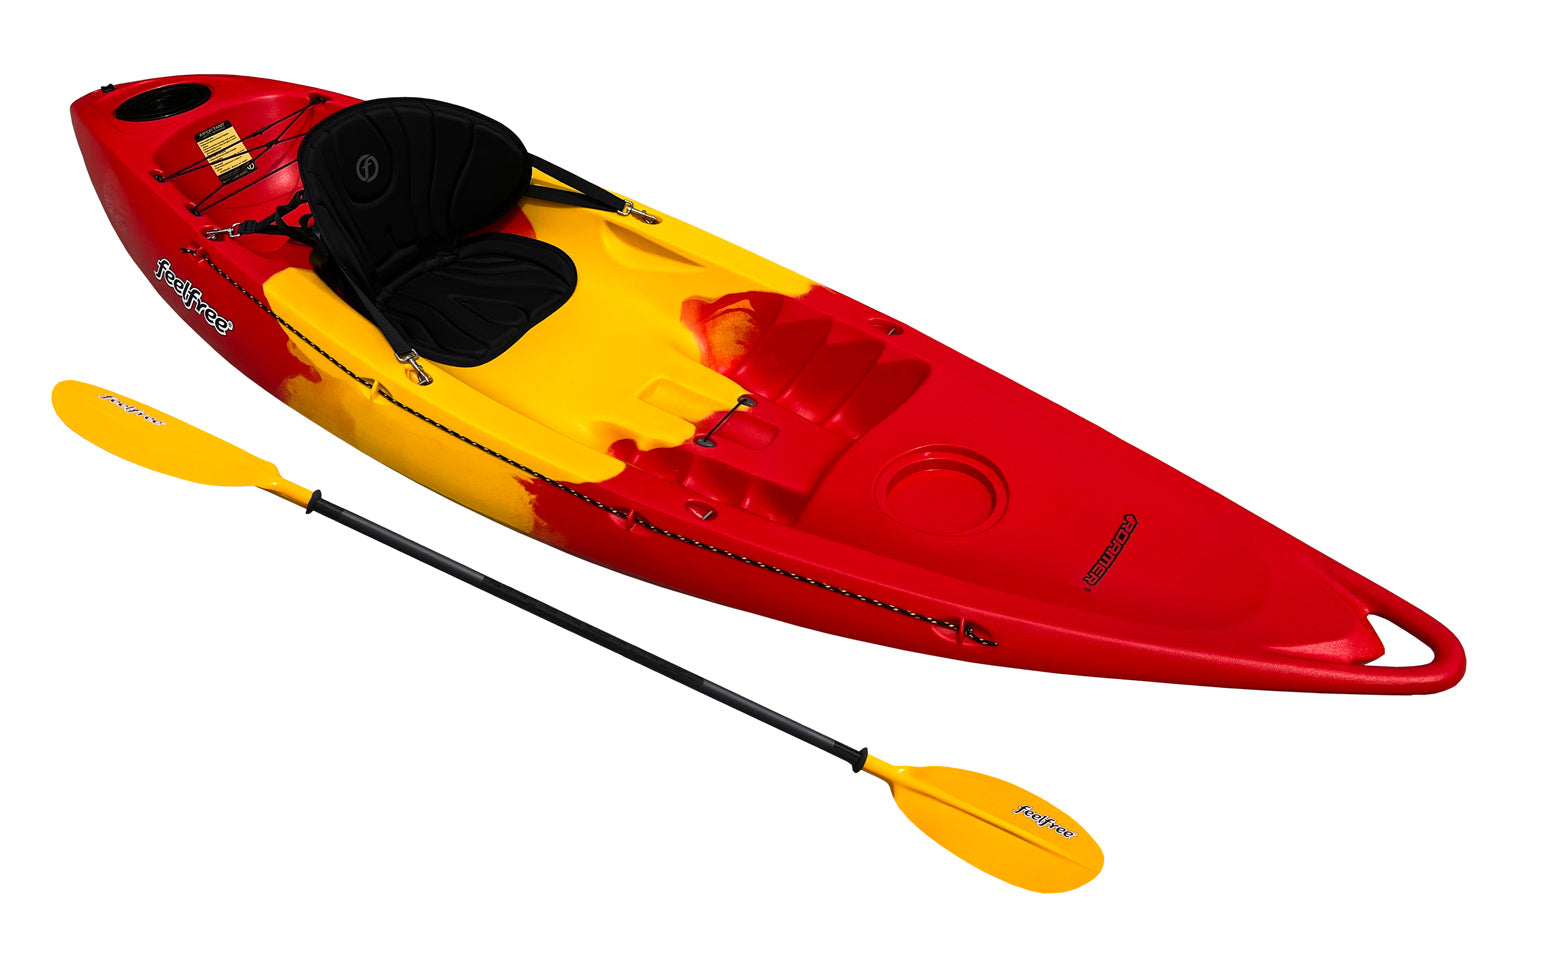 Deluxe Package available with the Feelfree Roamer 1 Sit On Top Kayaks